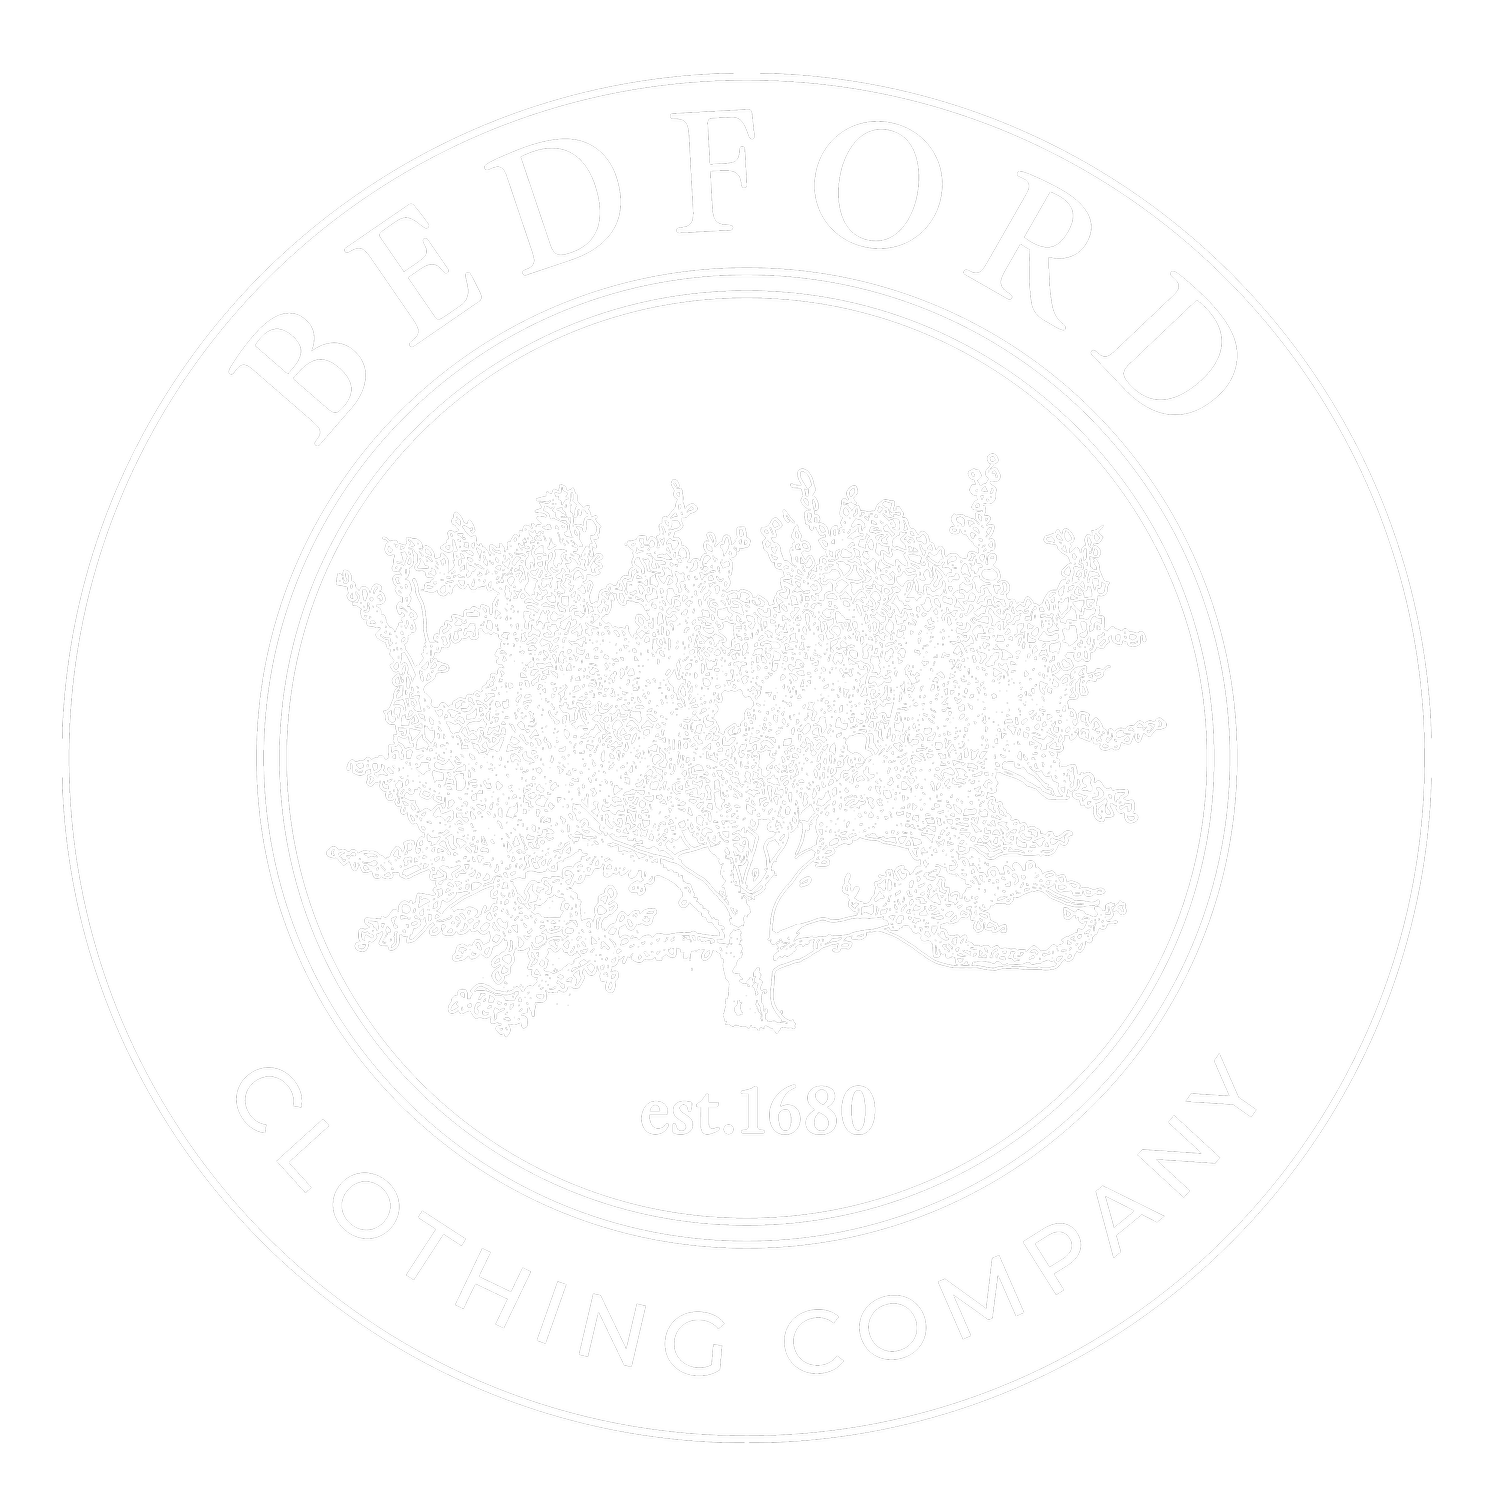 Bedford Clothing Co